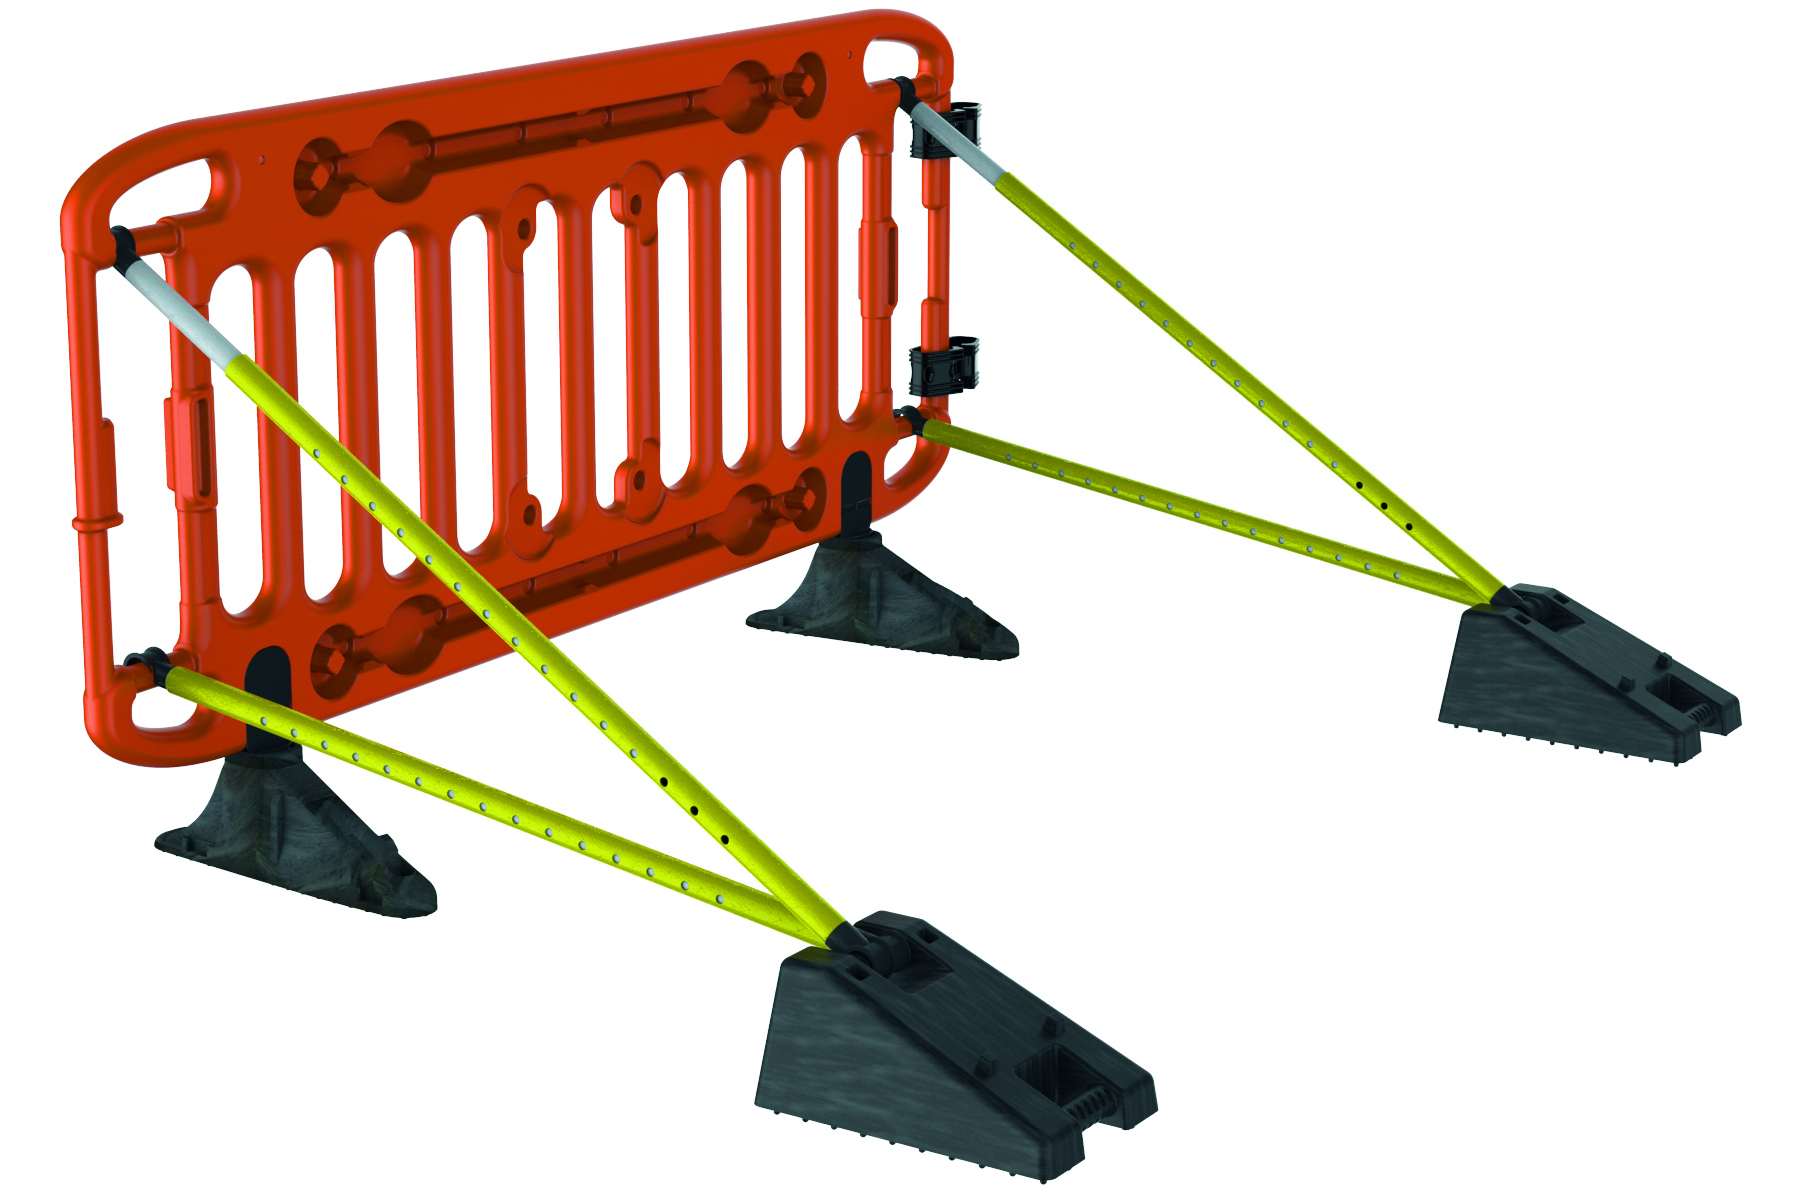 Example setup of the Frontier barrier using Sure Blocks and SurePole